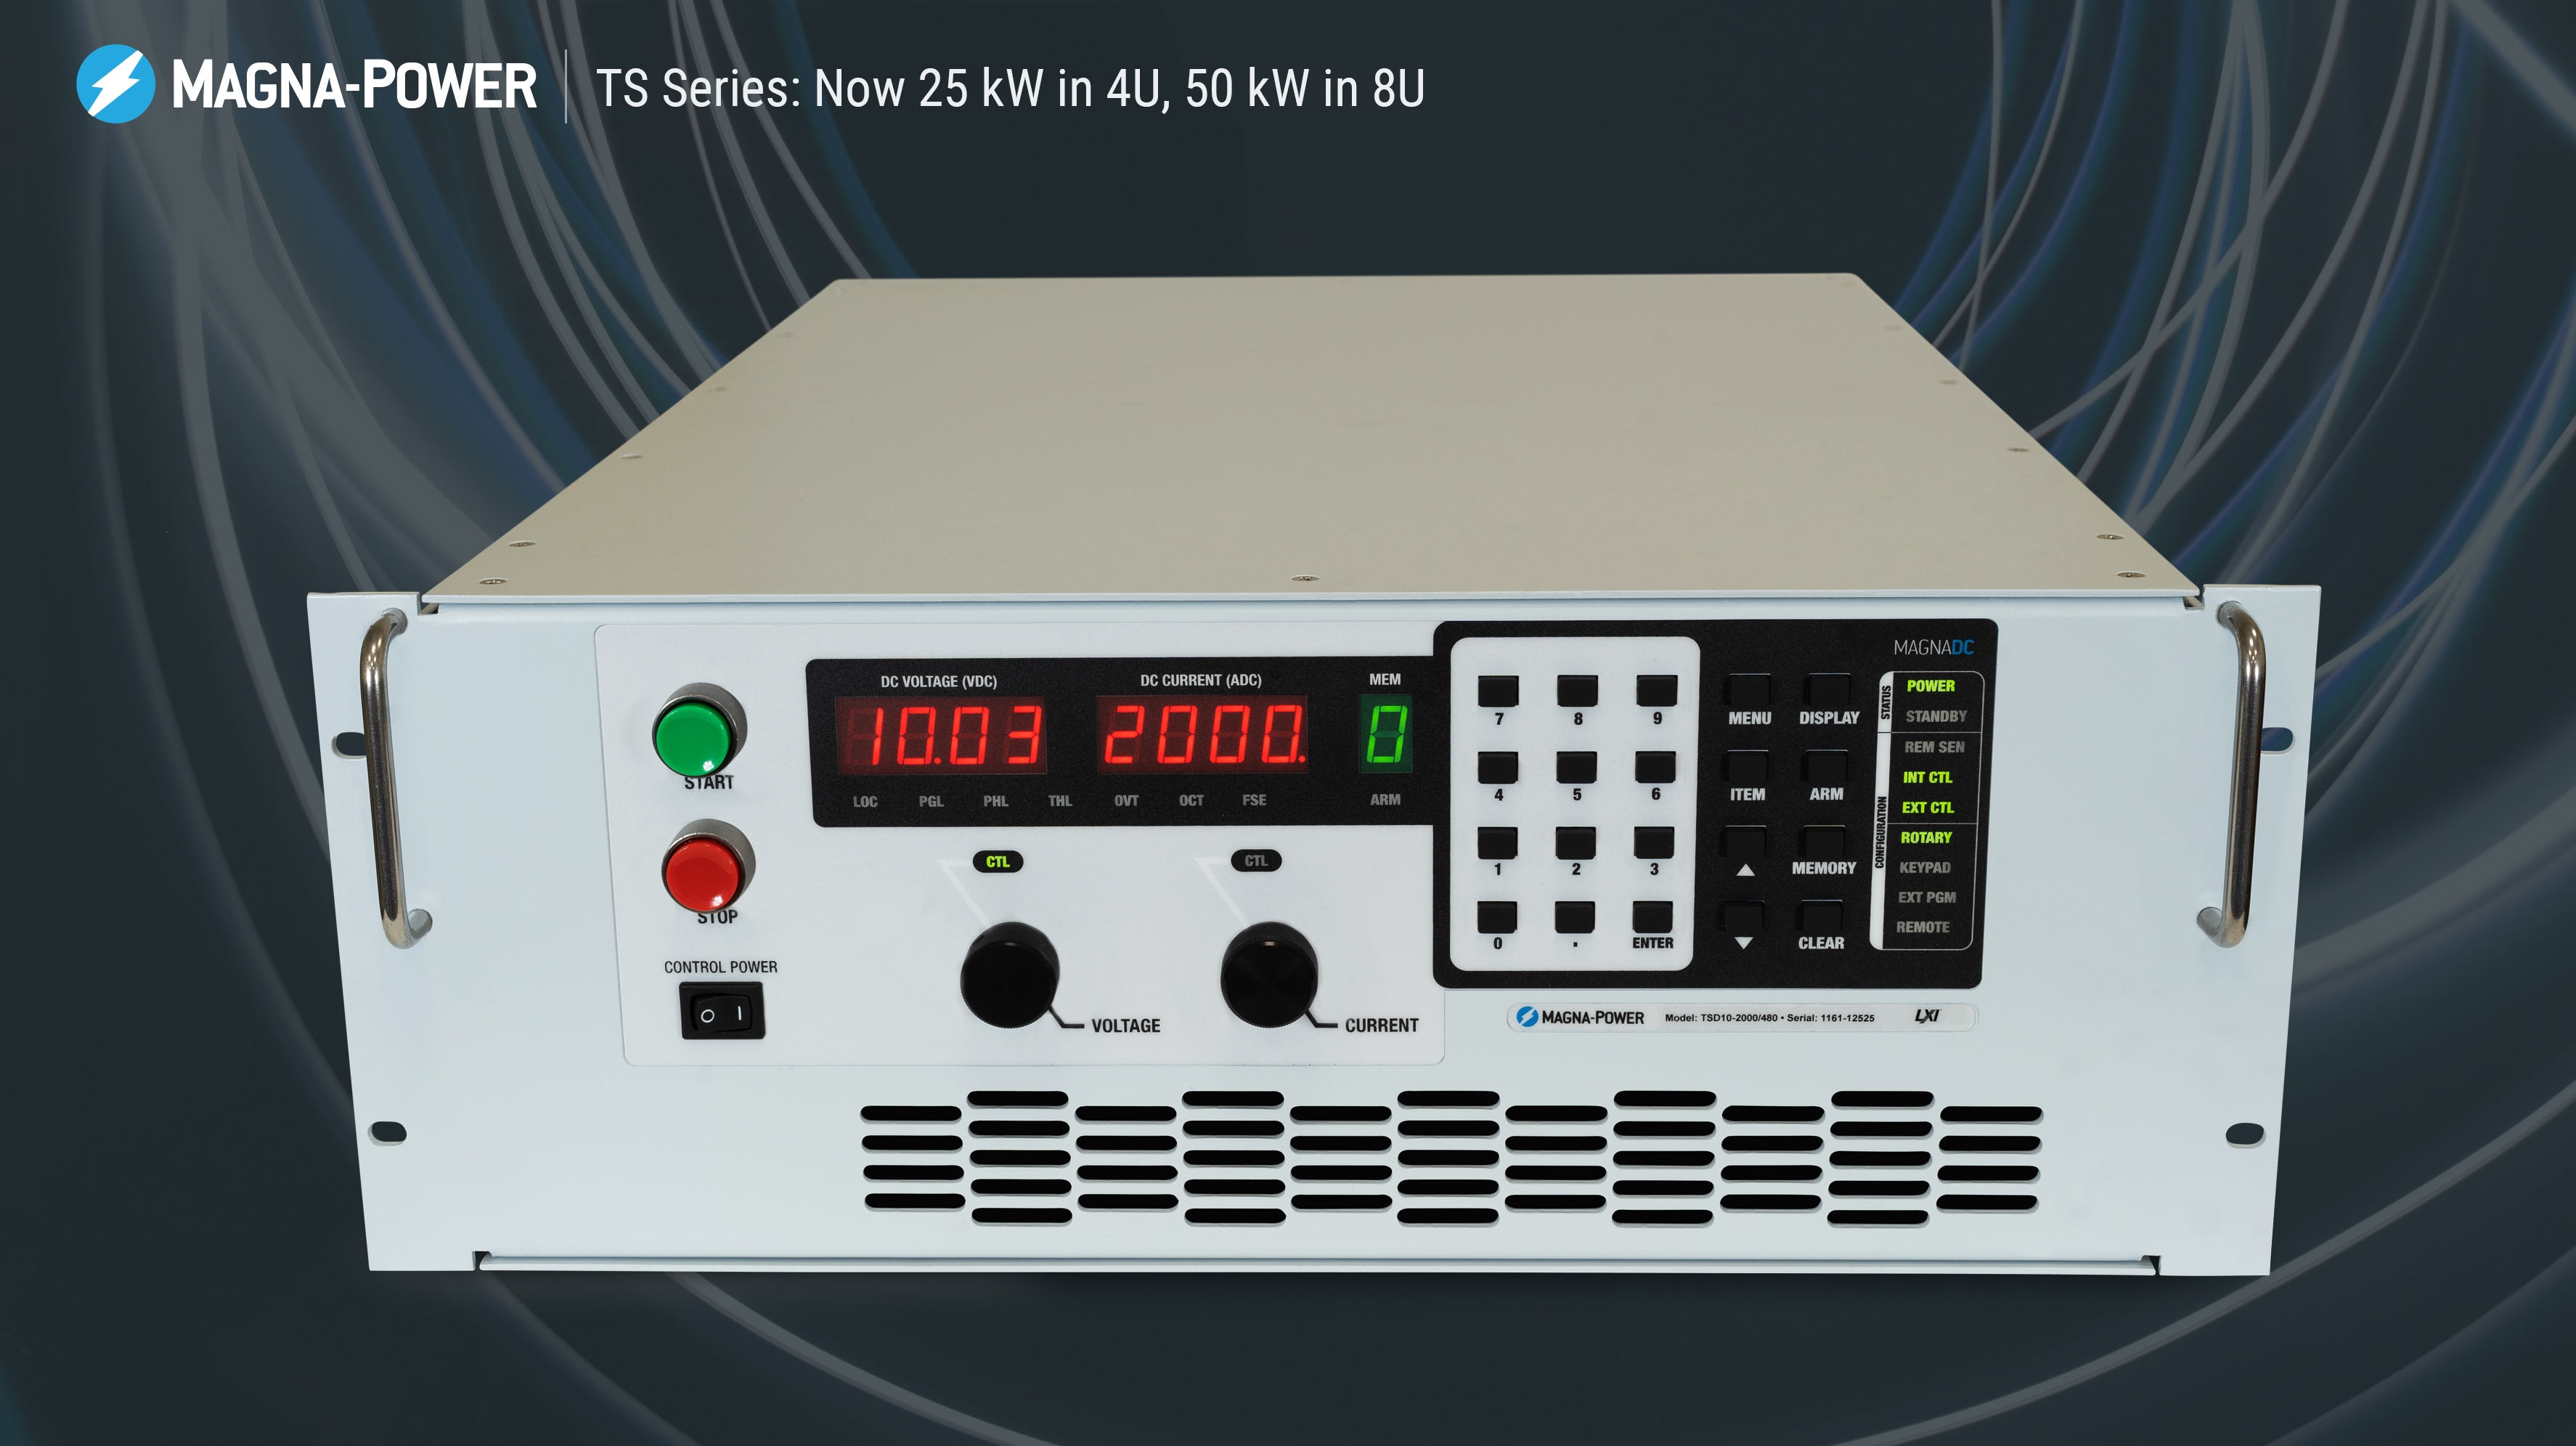 Upgraded TS Series, providing up to 20 kW and 25 kW in 4U with current up to 2000 Adc, and 40 kW and 45 kW in 8U with current up to 4000 Adc (25 kW 4U TS Series pictured)